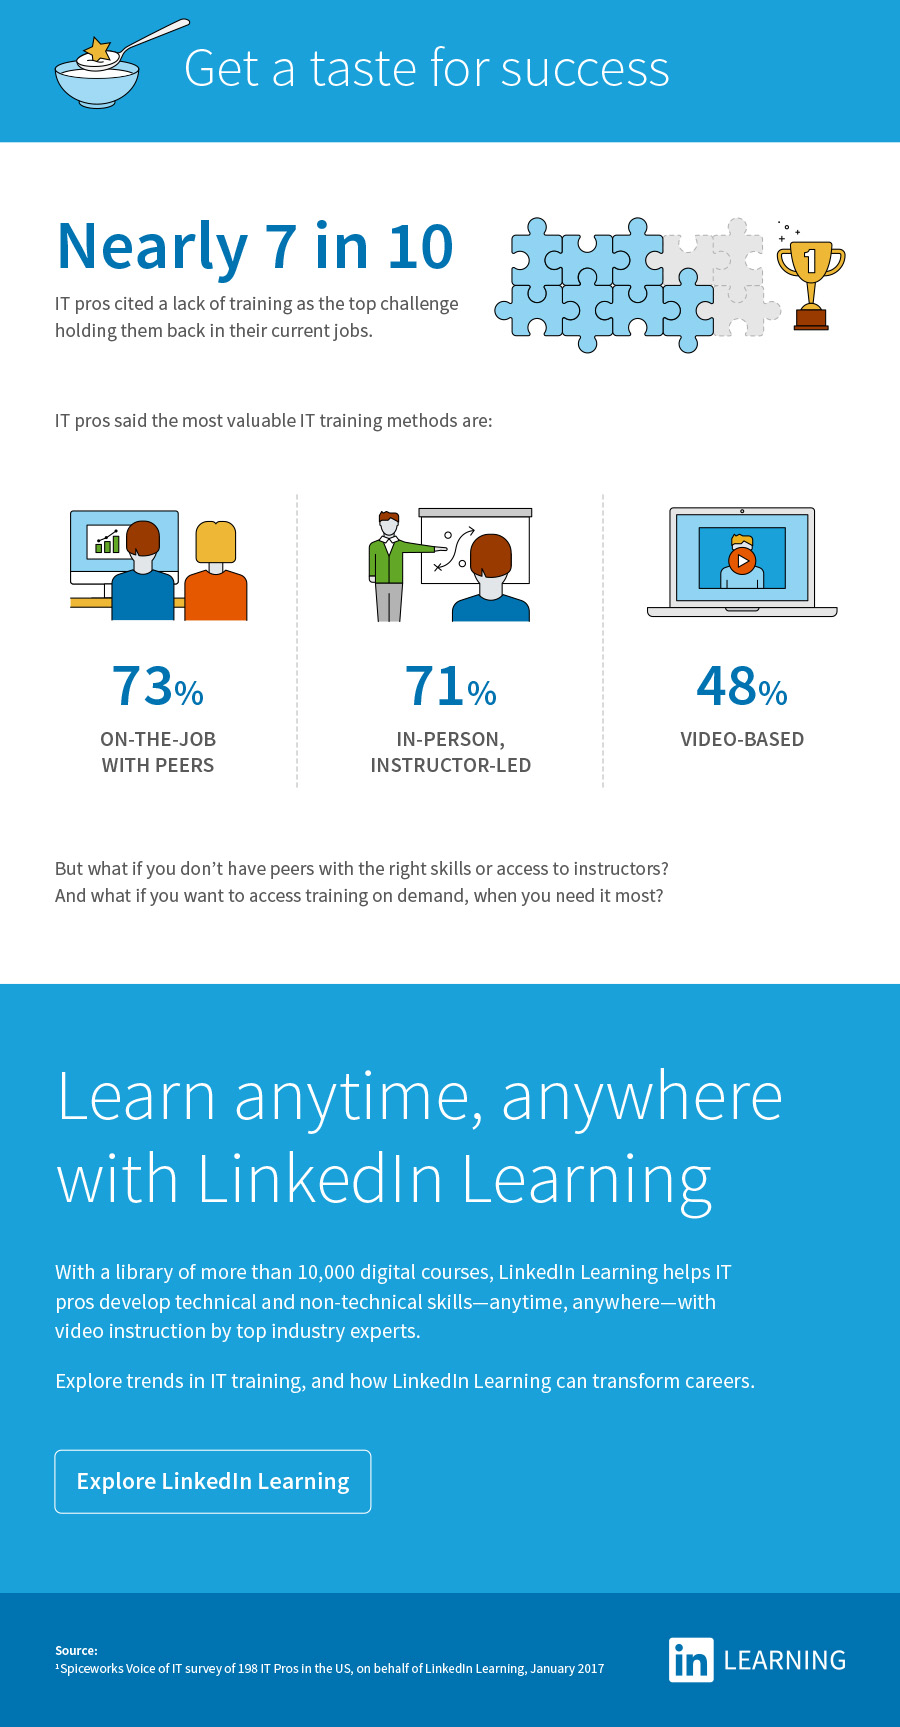 linkedin learning subscription cost